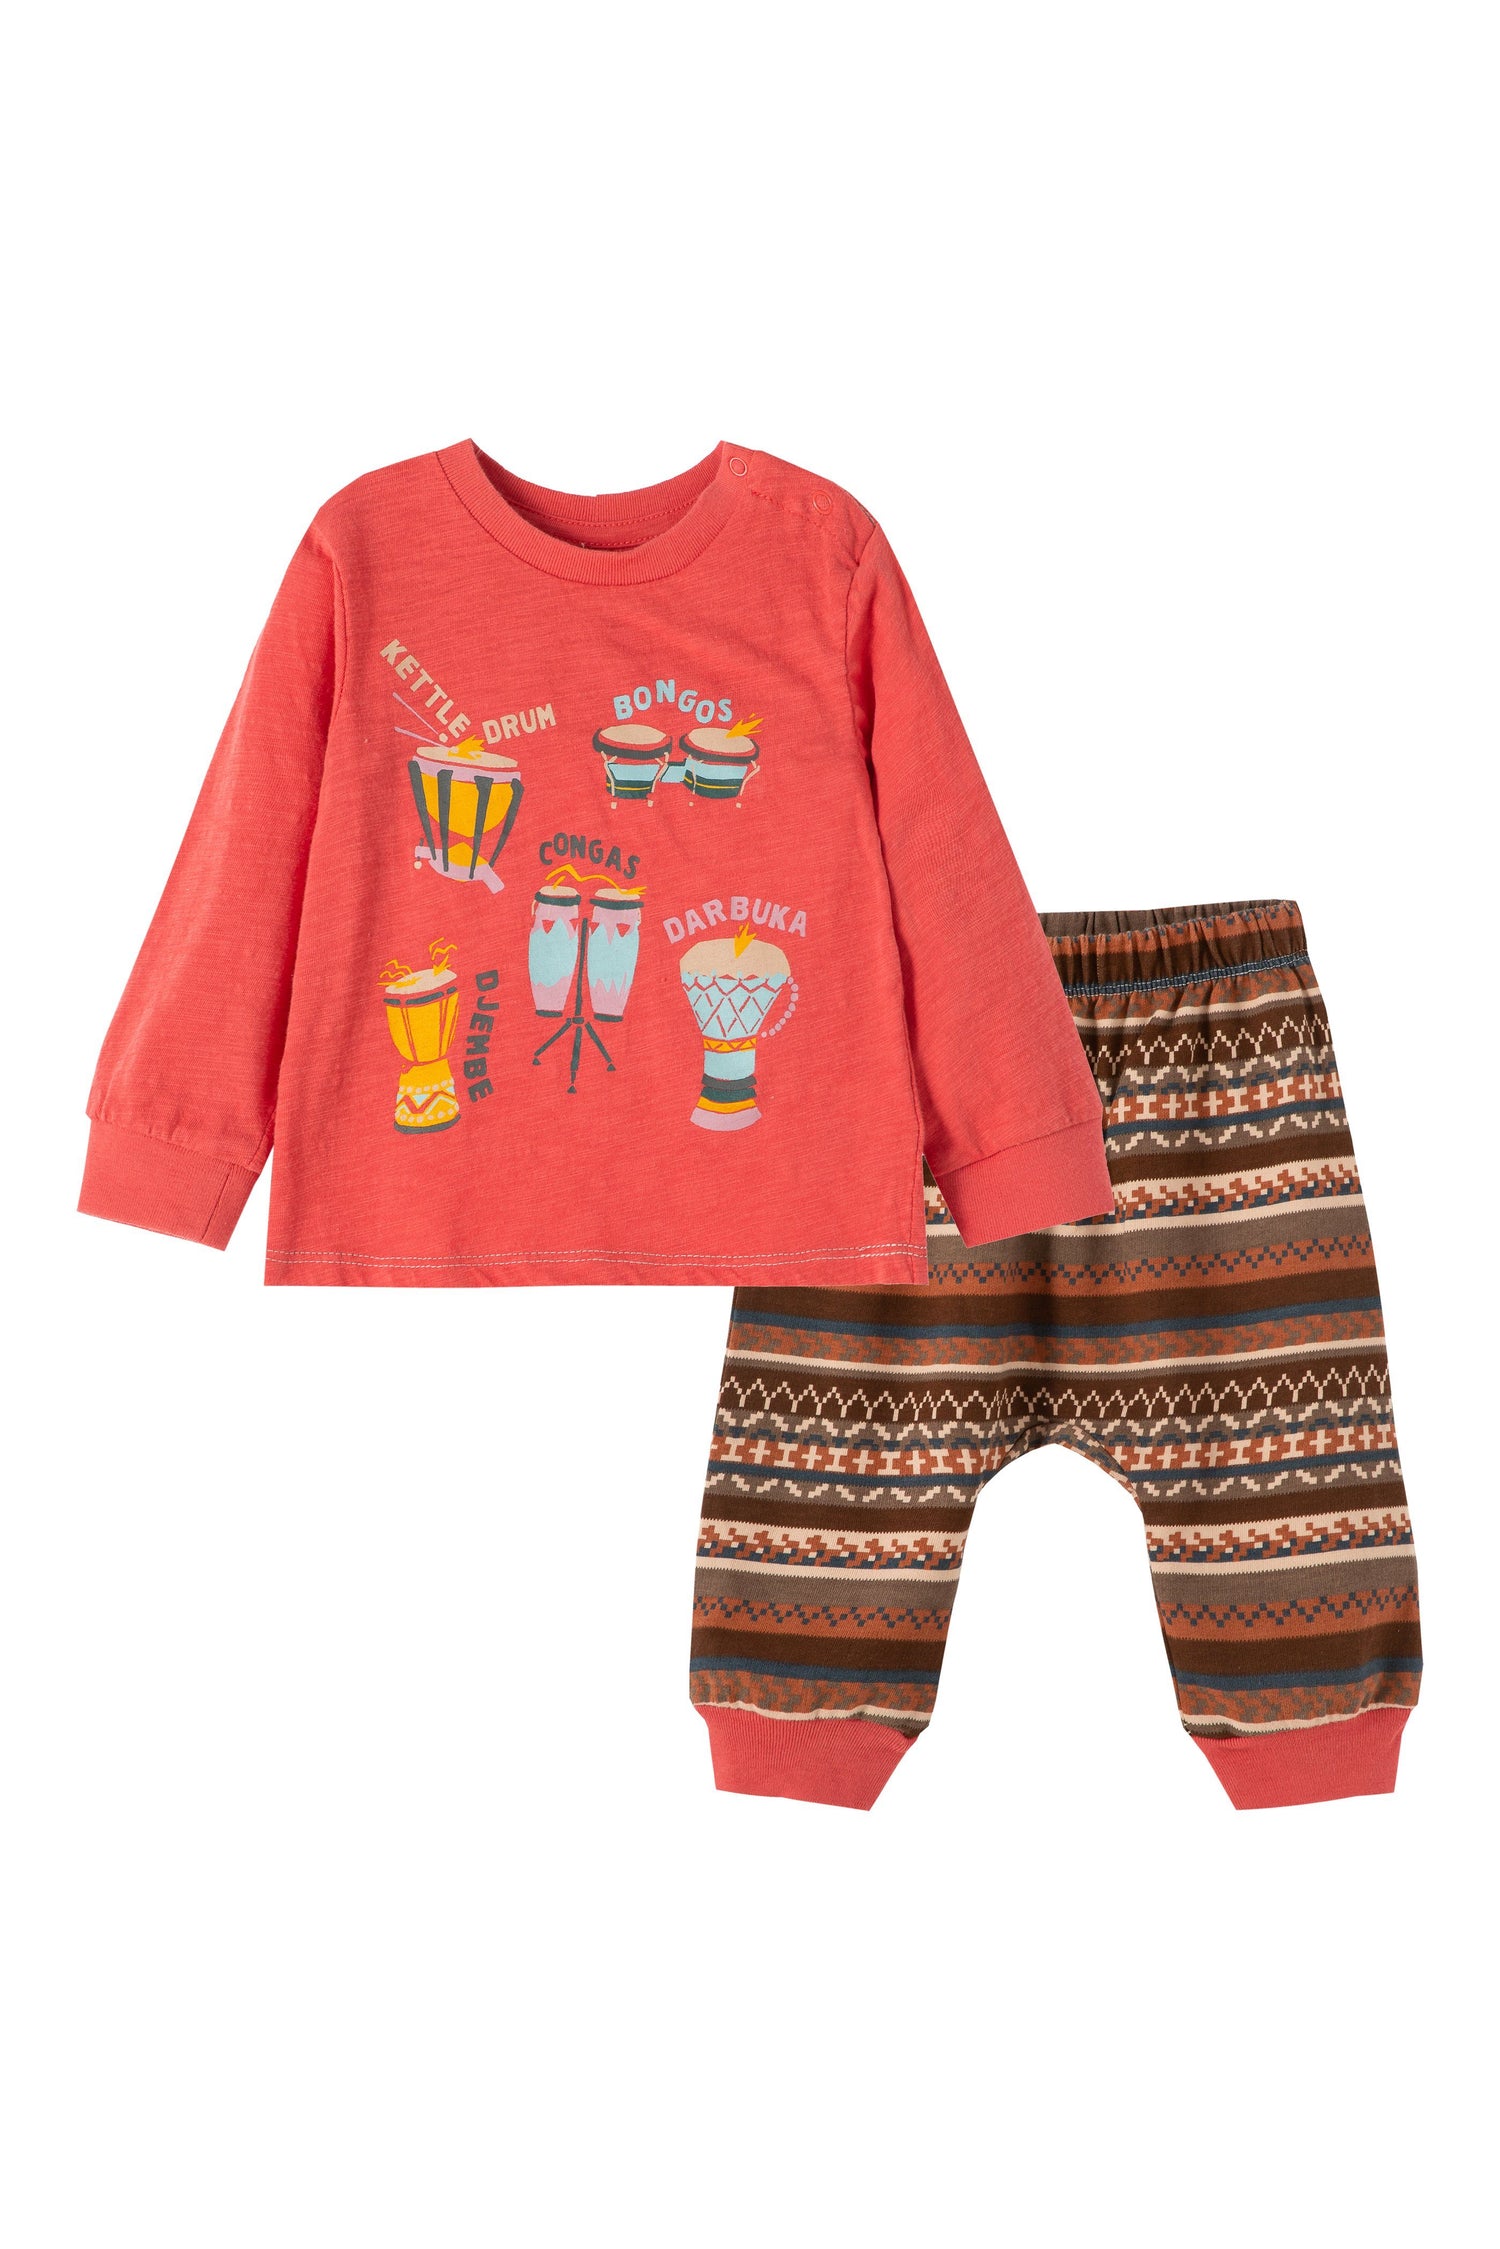 Red long sleeve t-shirt with images of different types of drums paired with multi-pattern, brown striped sweatpants. 